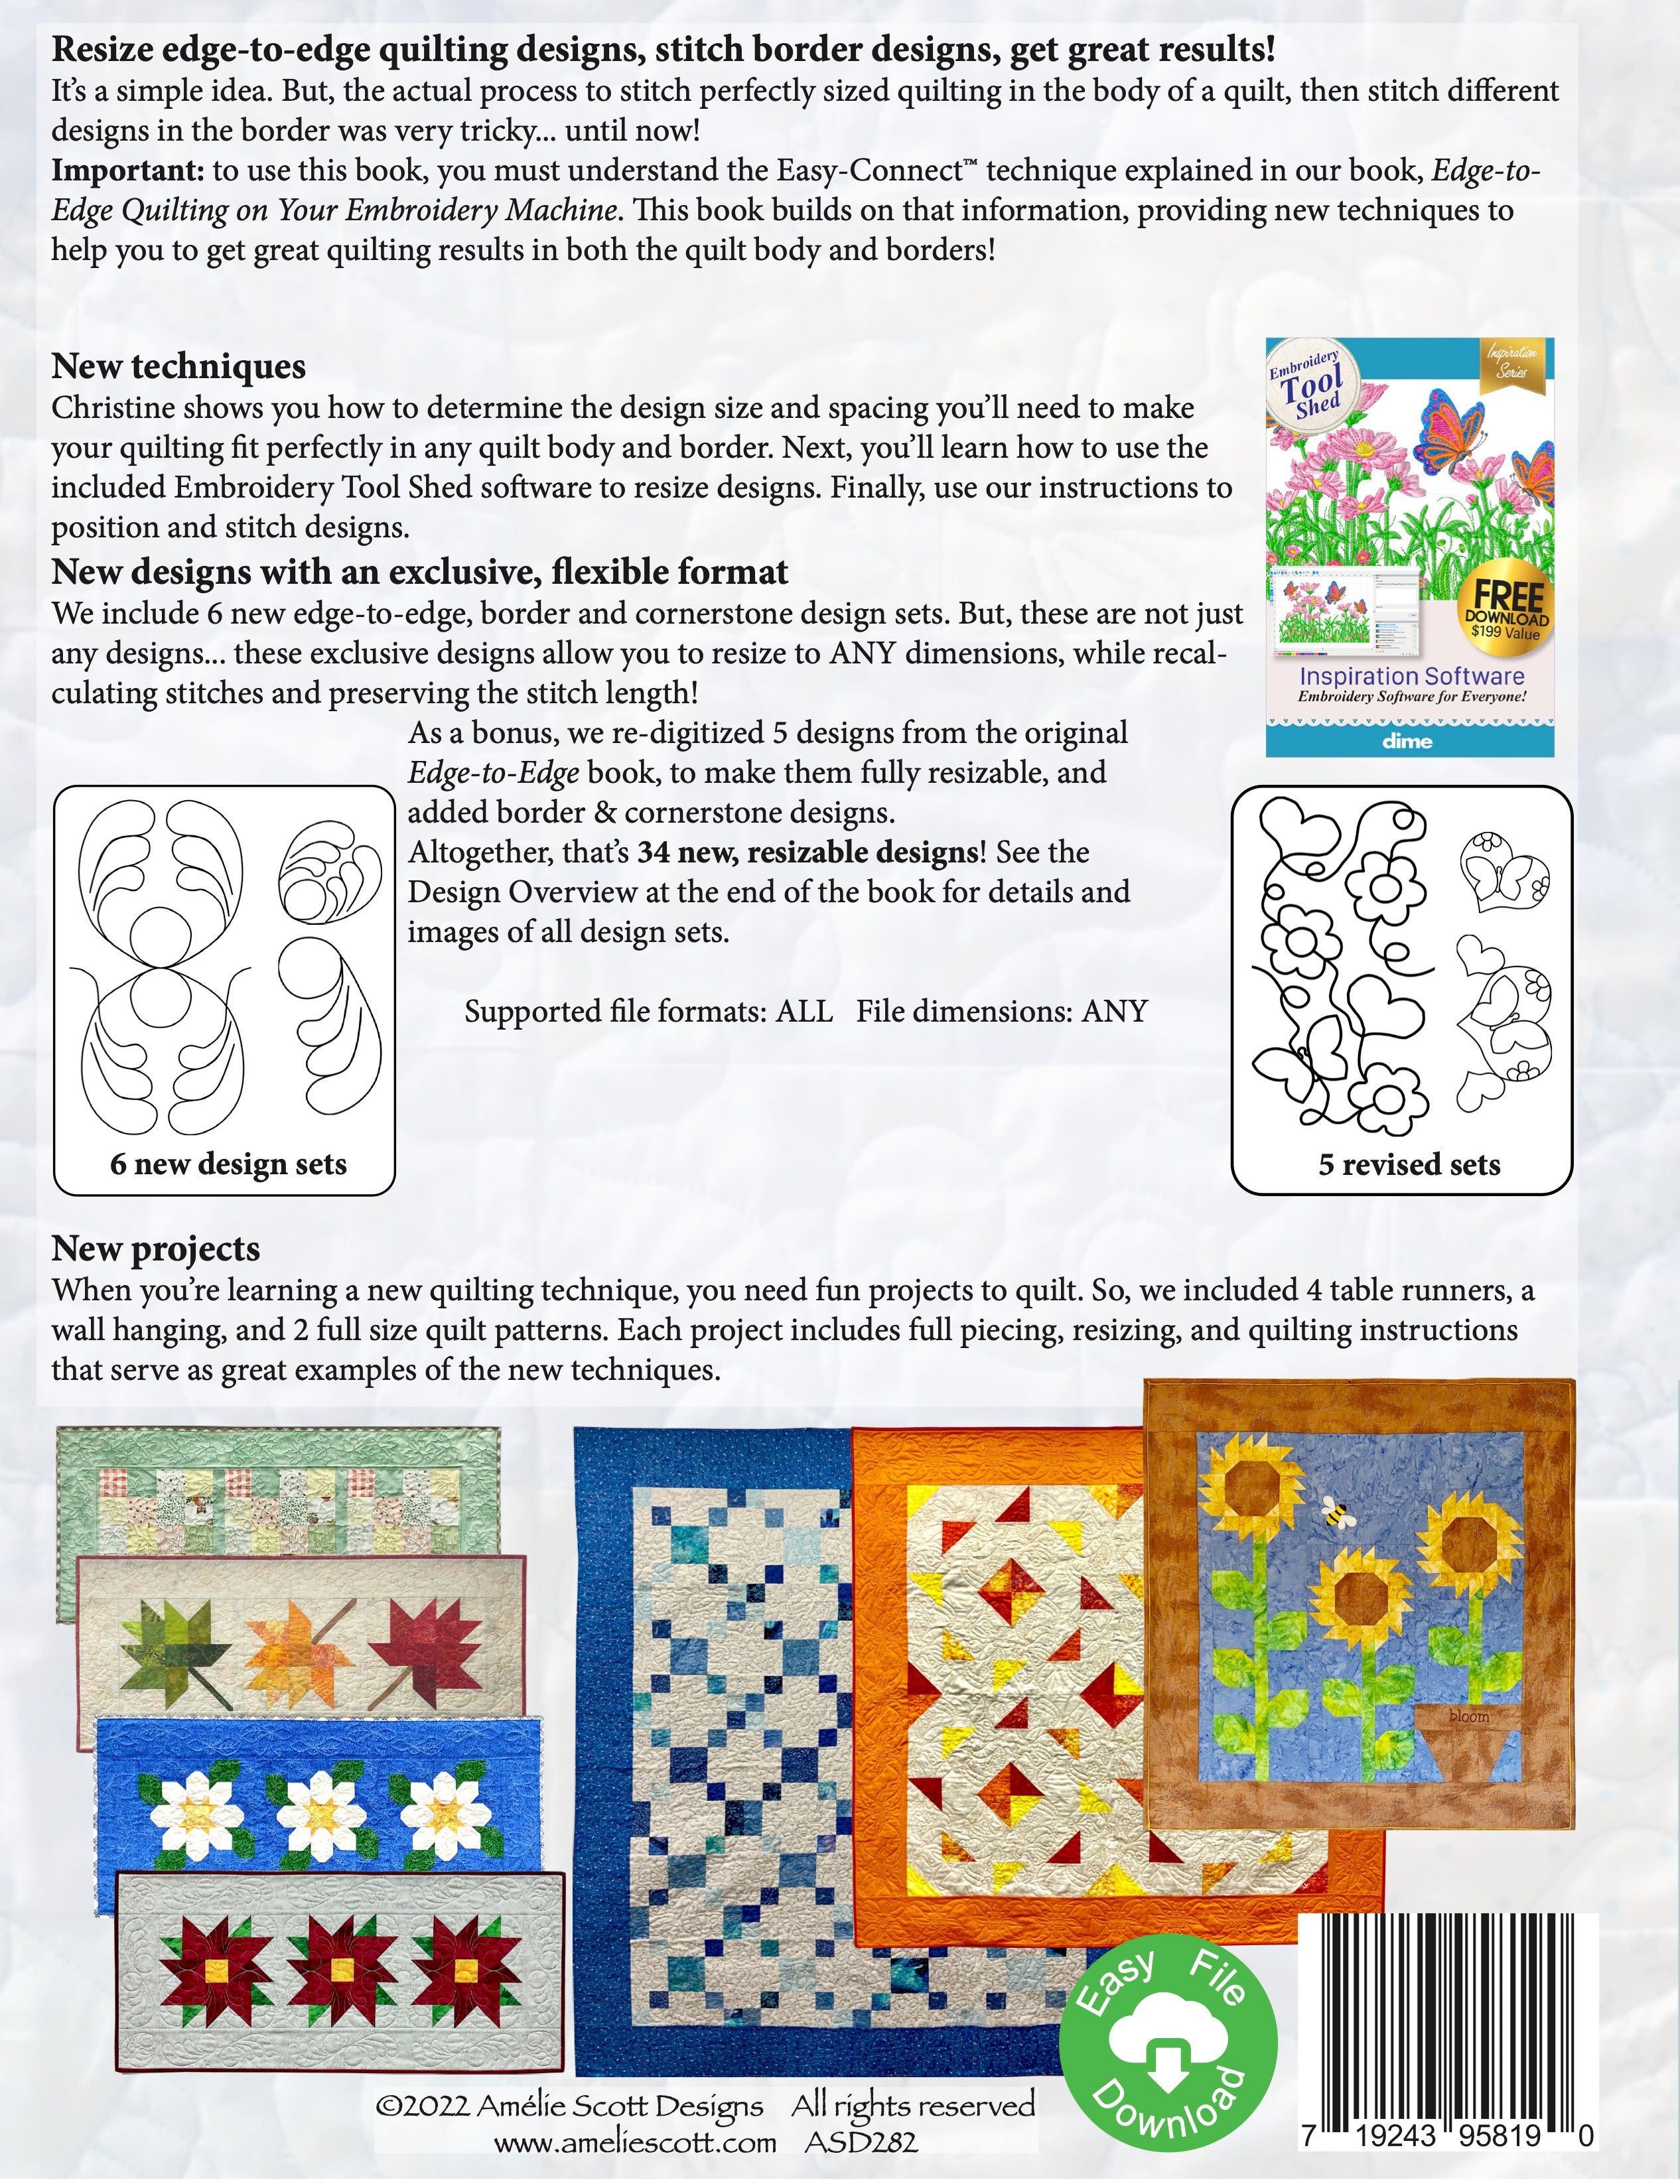 Edge-to-Edge PRO Quilting on Your Embroidery Machine Book by Amelie Scott